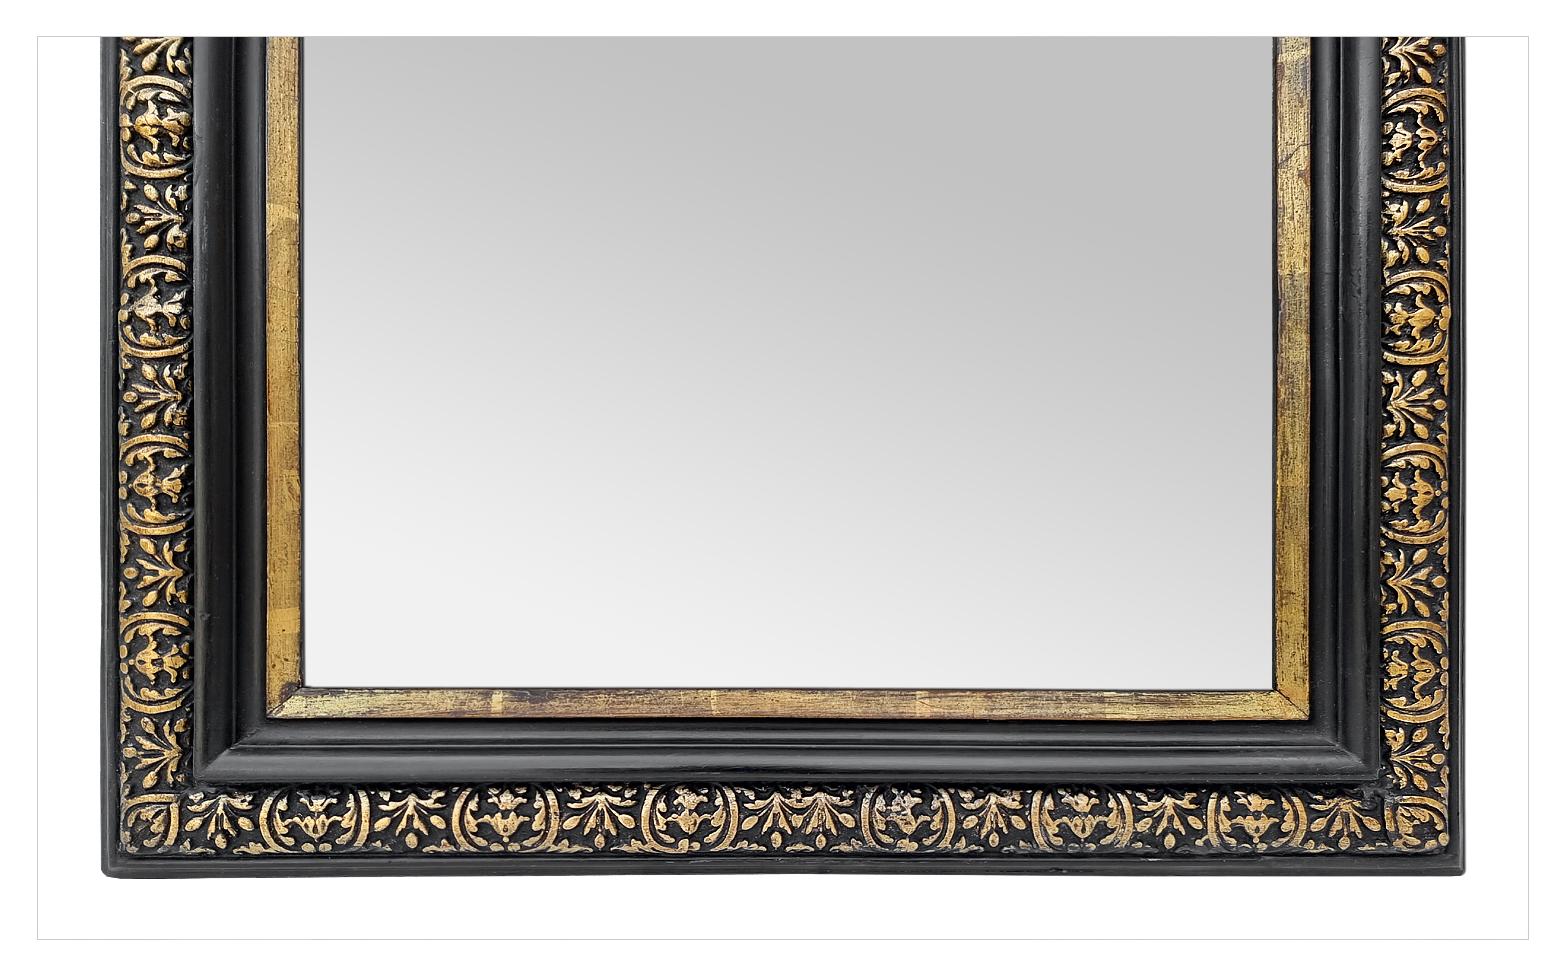 Patinated Antique French Mirror, Giltwood & Black Colors, circa 1870